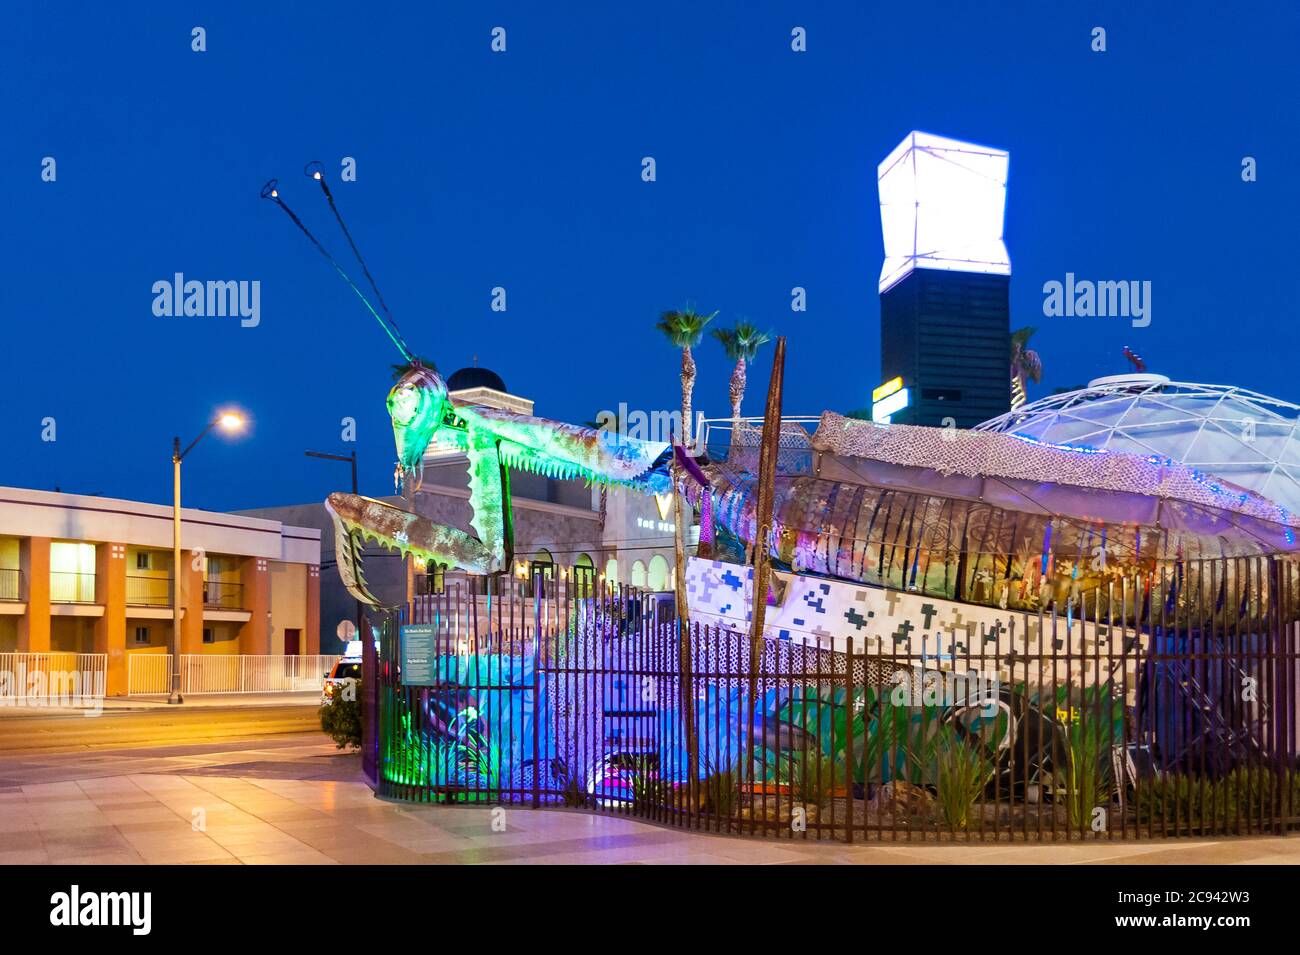 Fire breathing giant Praying Mantis arts sculpture in Old Las Vegas’ Container Park Stock Photo